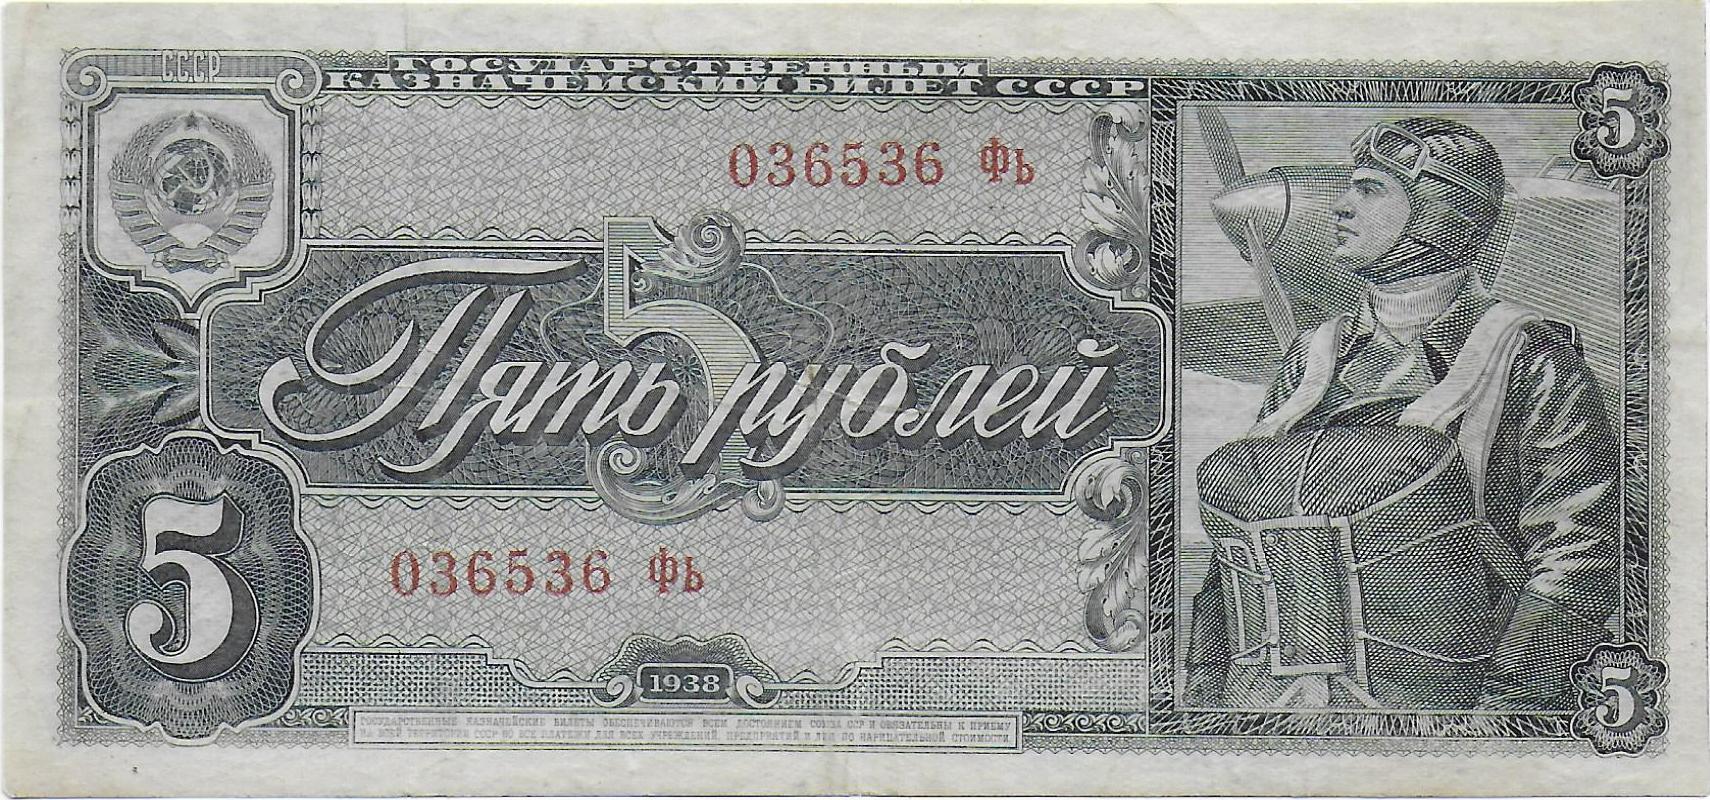 Russia 5 Rubles 1938 front.jpg